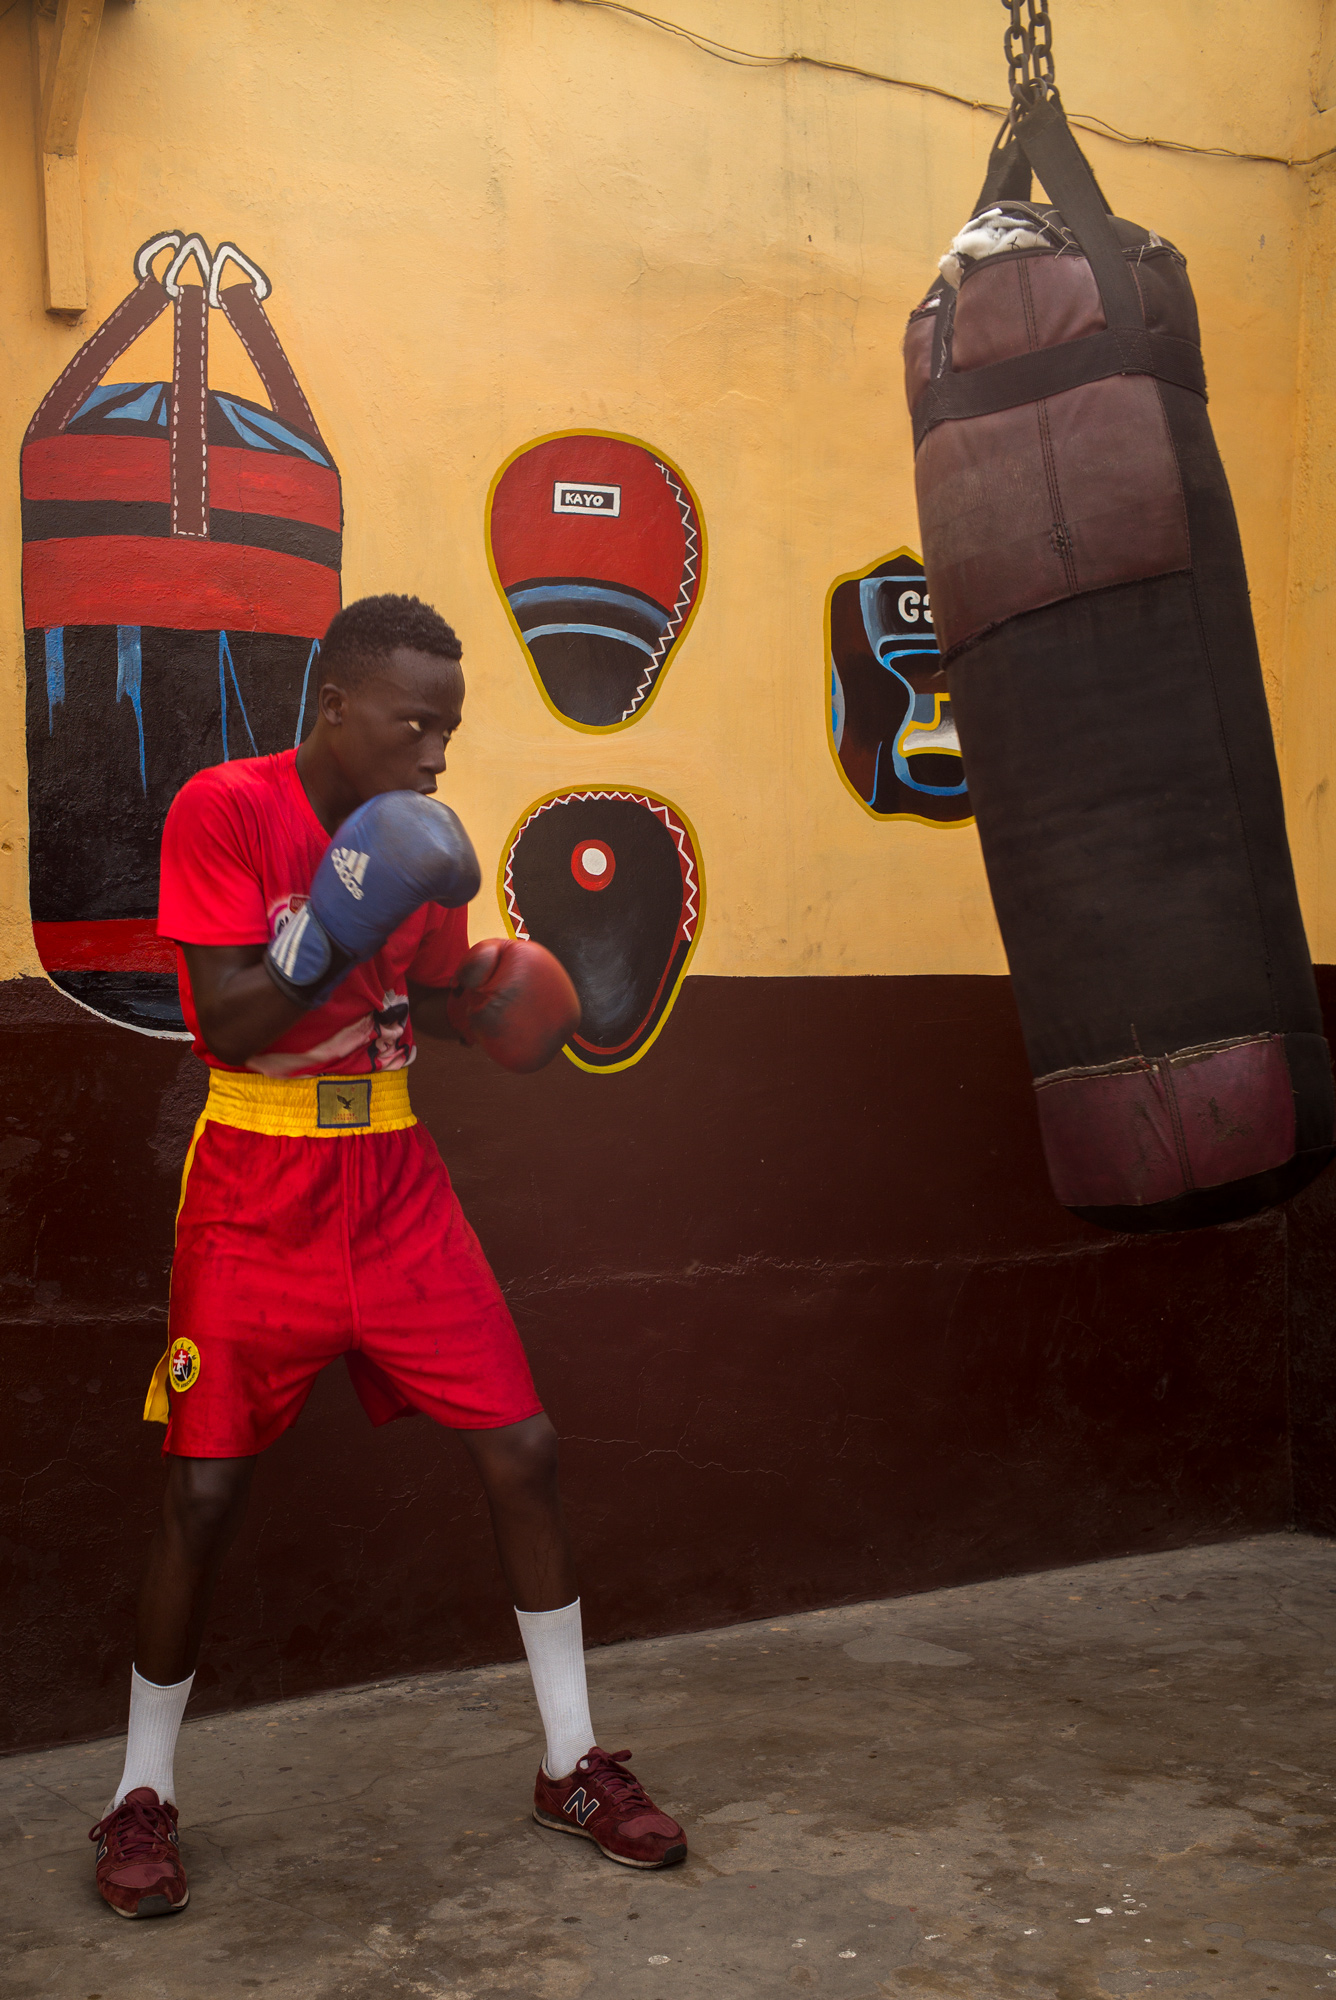  Samuel Takgi, 17 - Black Bombers National Team. 8 years of boxing: 6 Fights / 6 Victories 